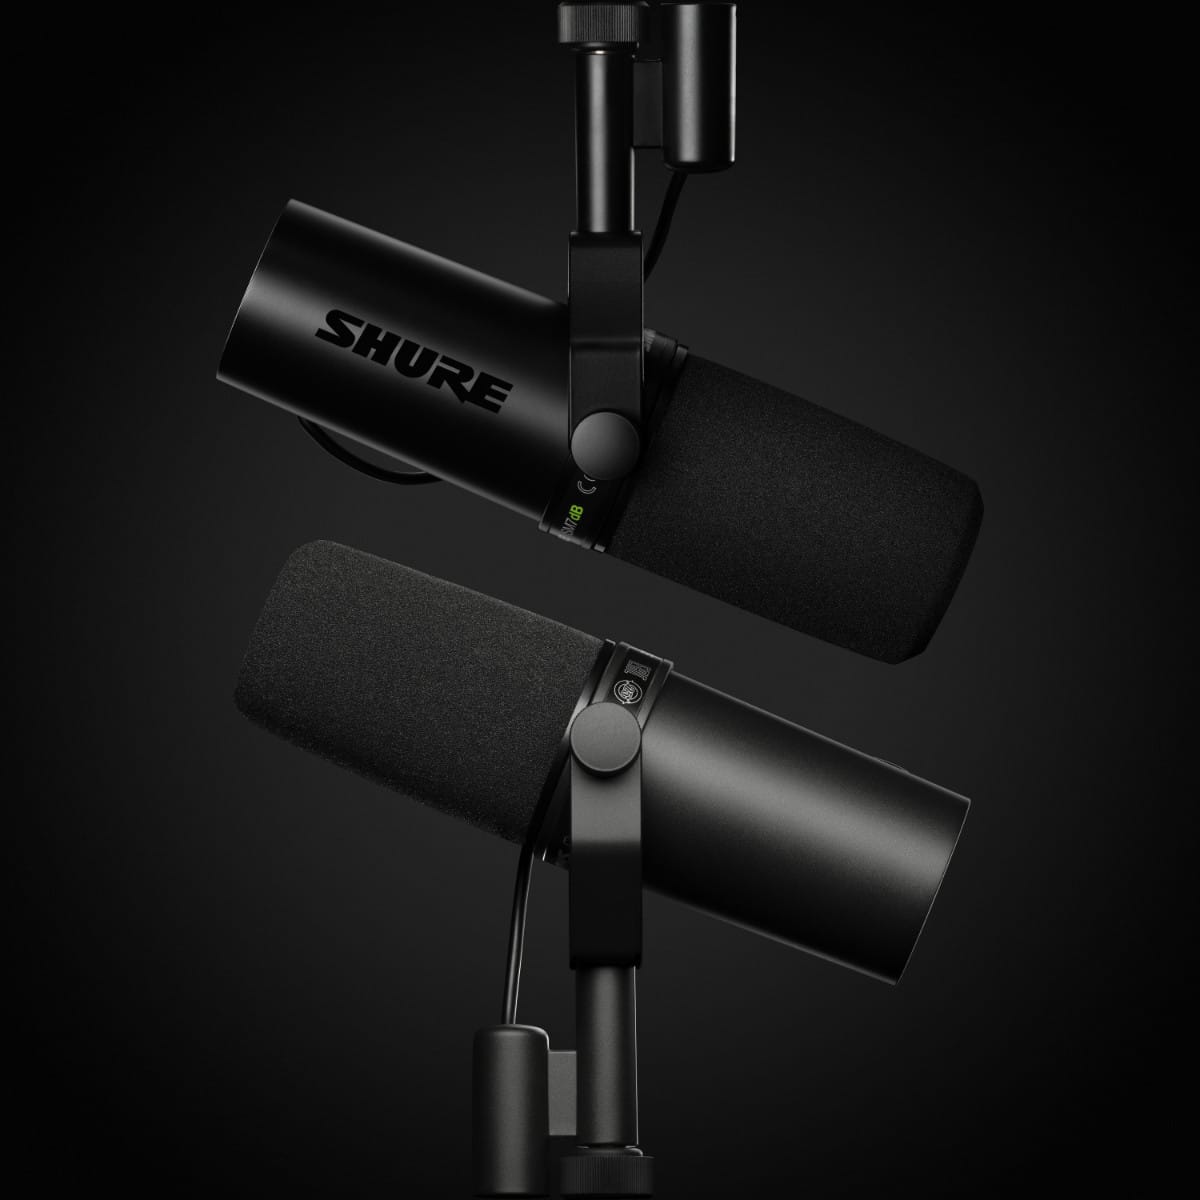 Shure announces the SM7dB XLR dynamic vocal microphone for podcasting